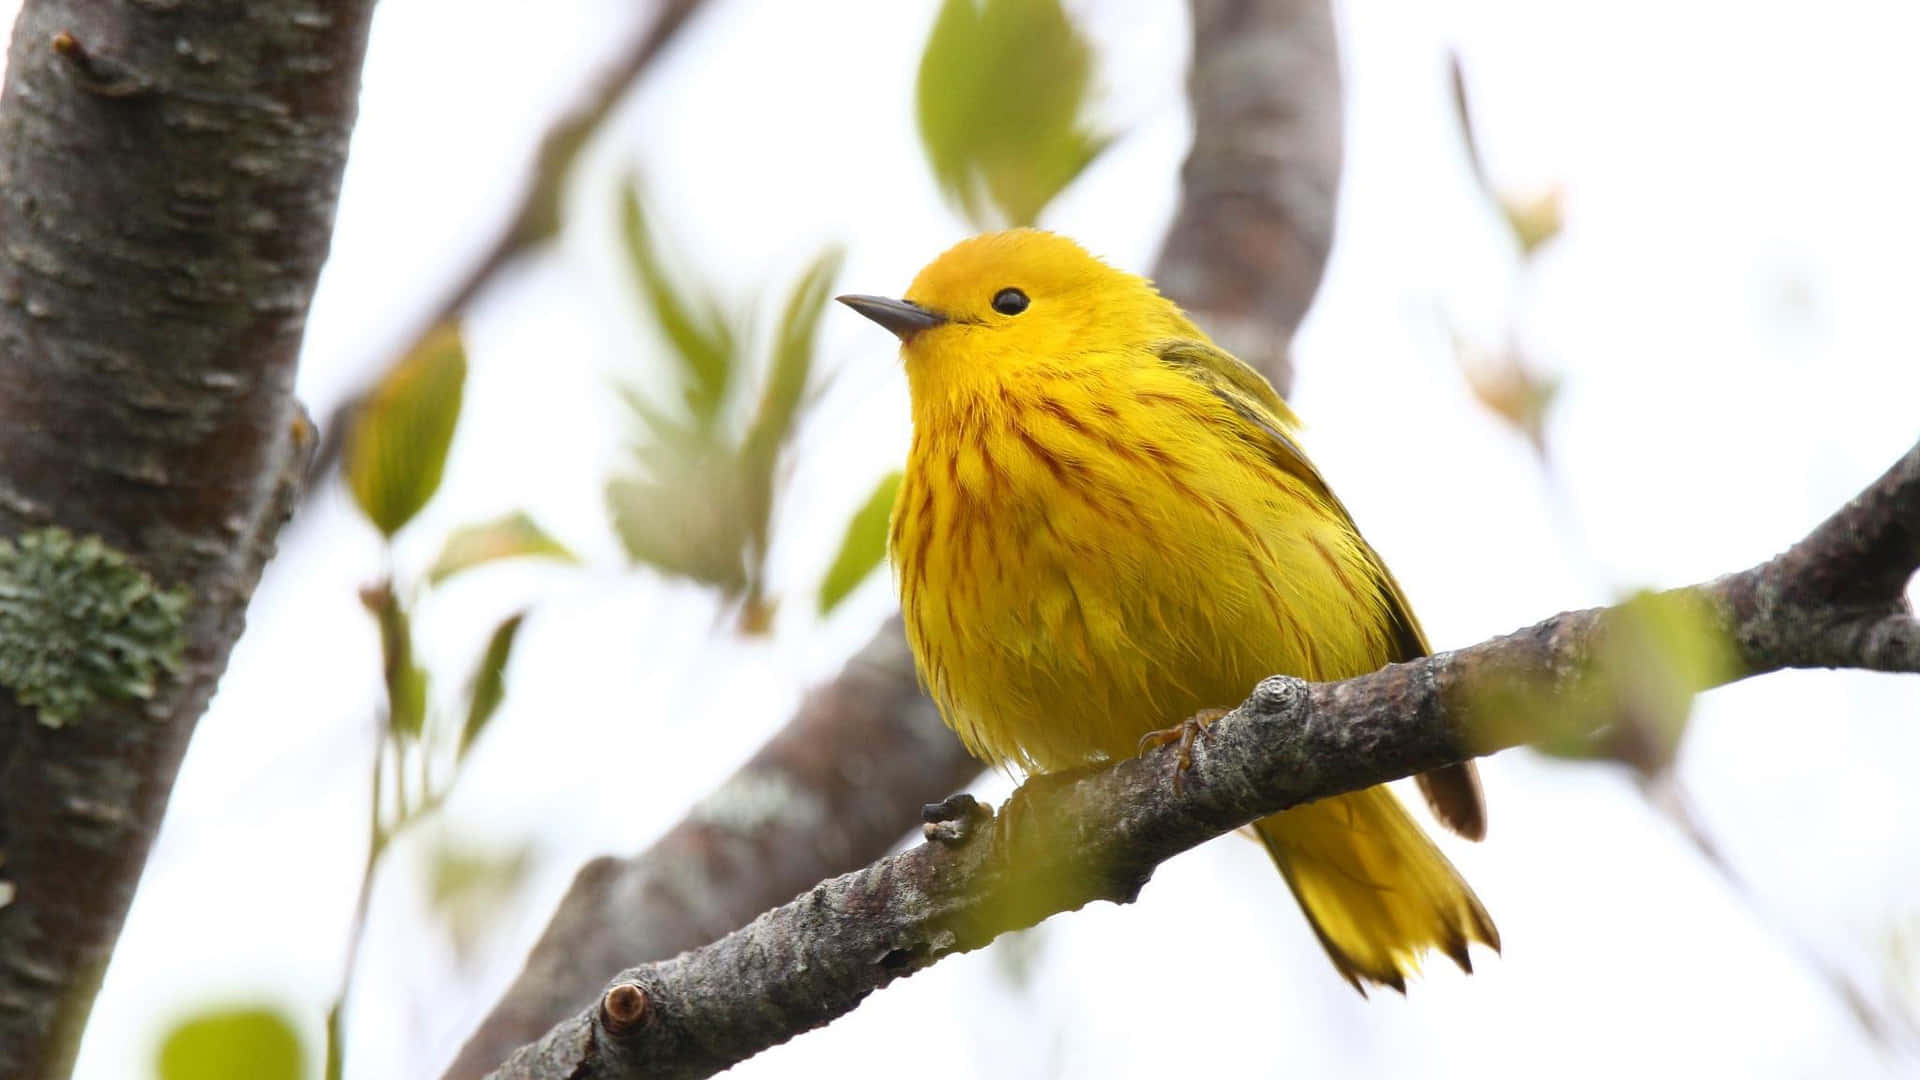 A vibrant Yellow Warbler perched on a leafy branch Wallpaper